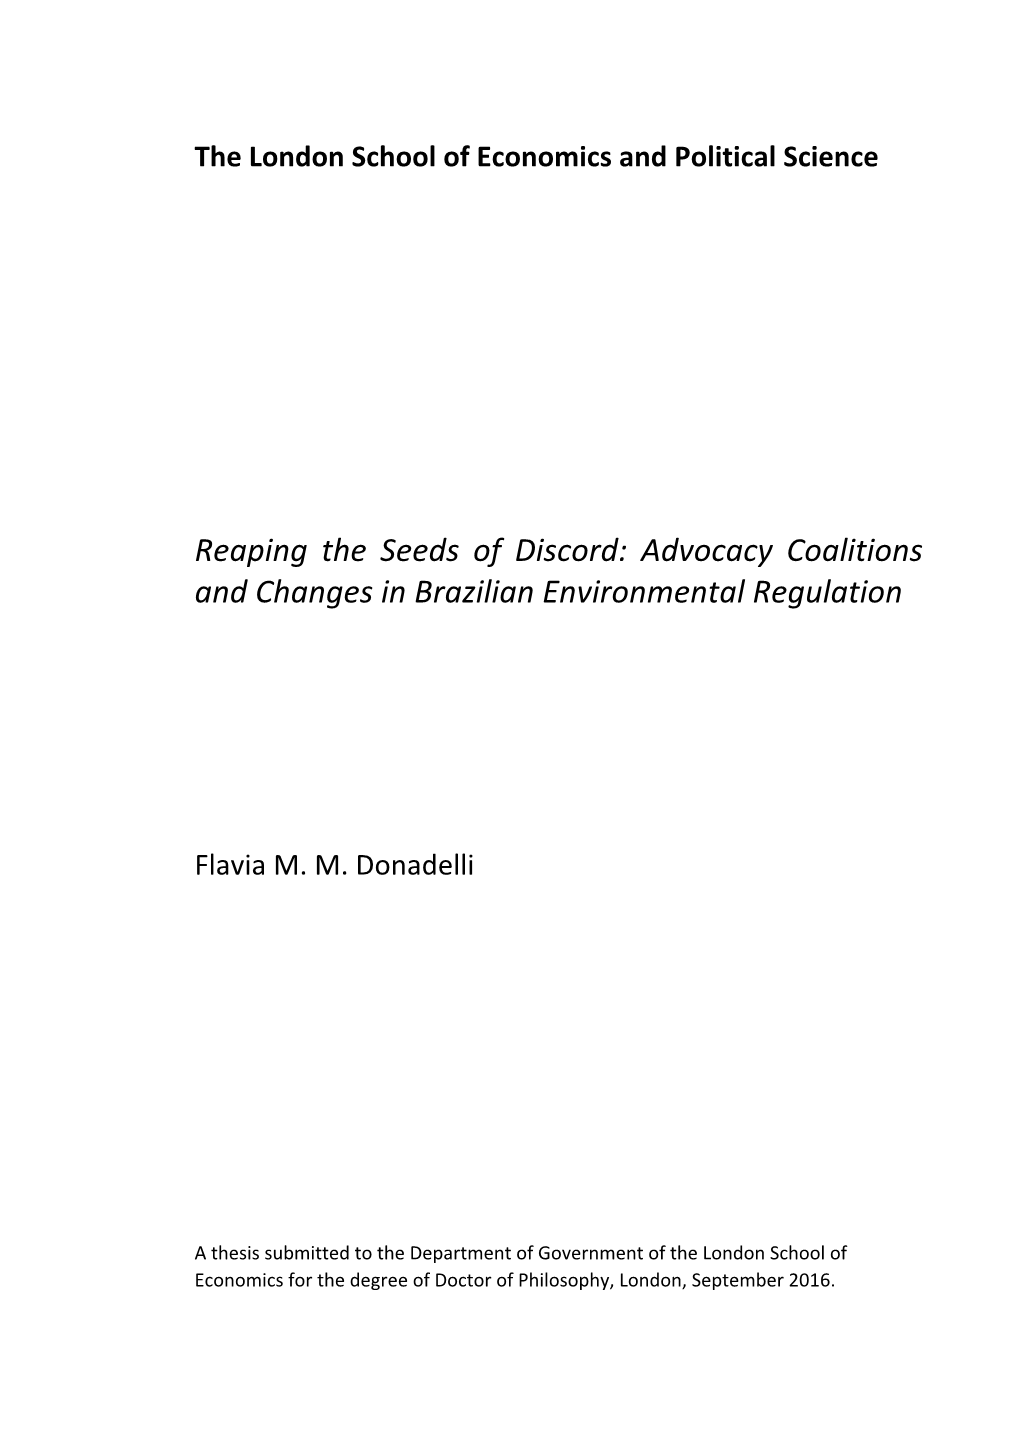 Advocacy Coalitions and Changes in Brazilian Environmental Regulation